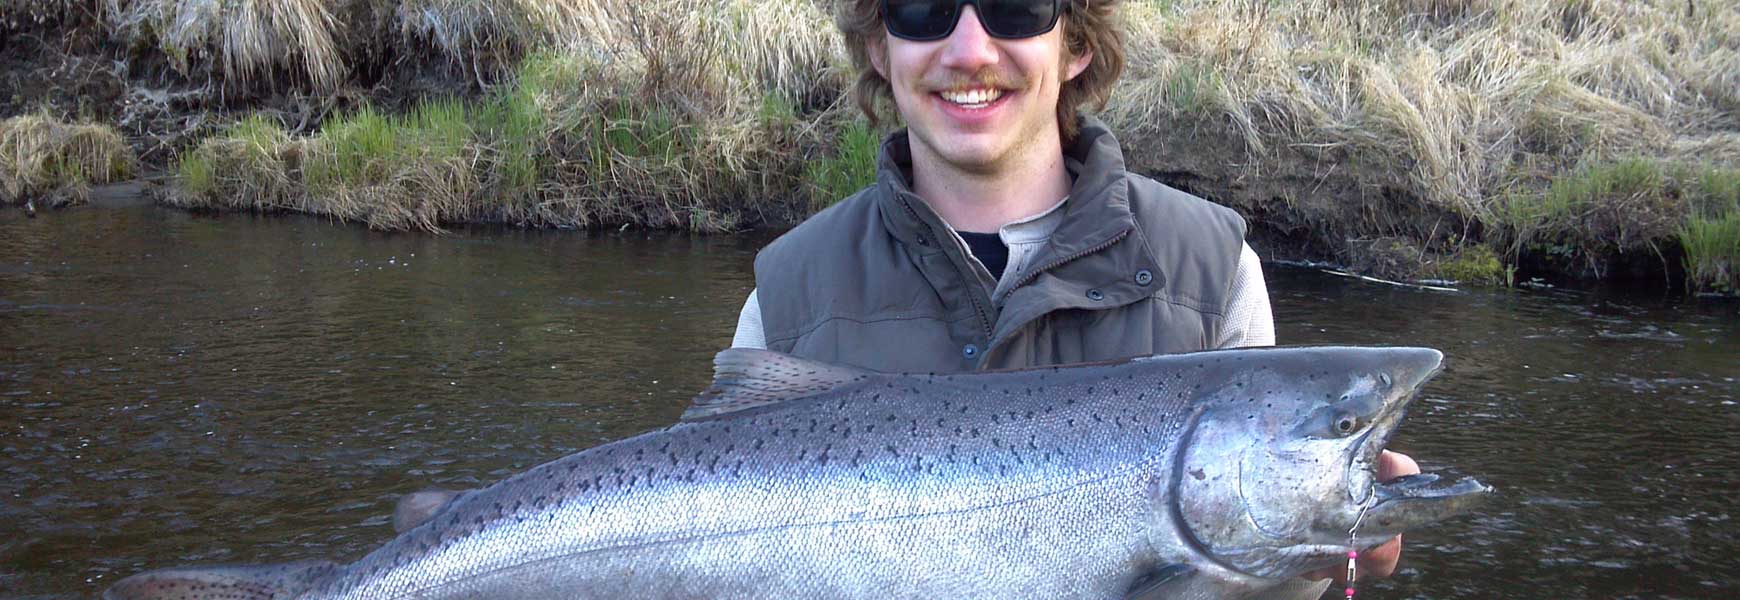 Man holding salmon by river